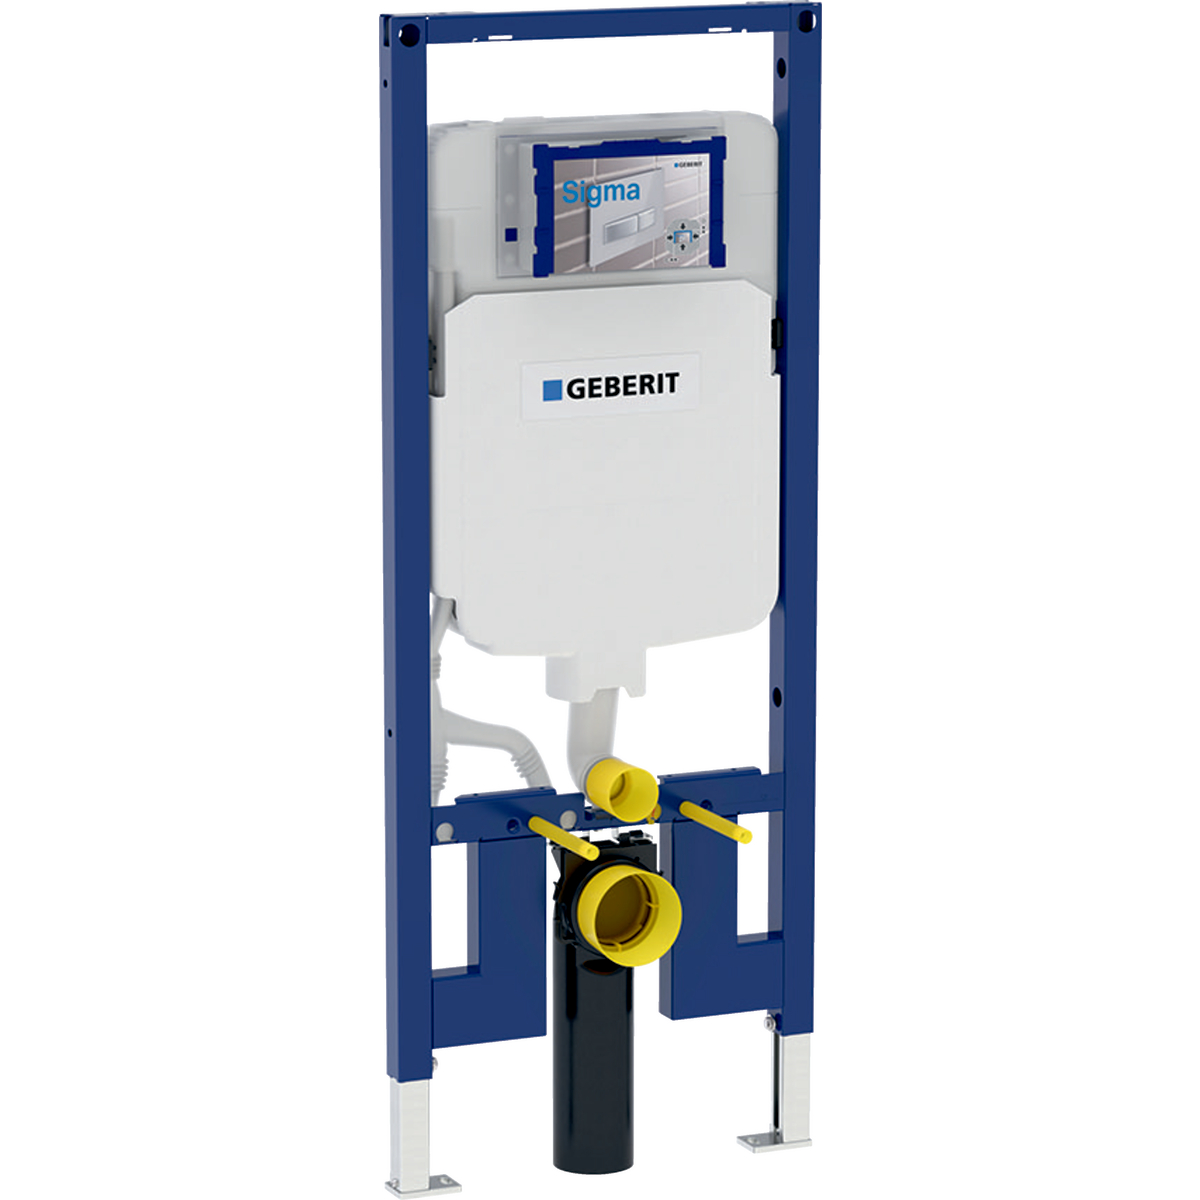 Geberit 111.597.00.1 Duofix Element for Wall-Hung WC, 120 Cm, with Sigma Concealed Cistern 8 Cm, for Wood Frame Wall, 4.8 / 3 Liters